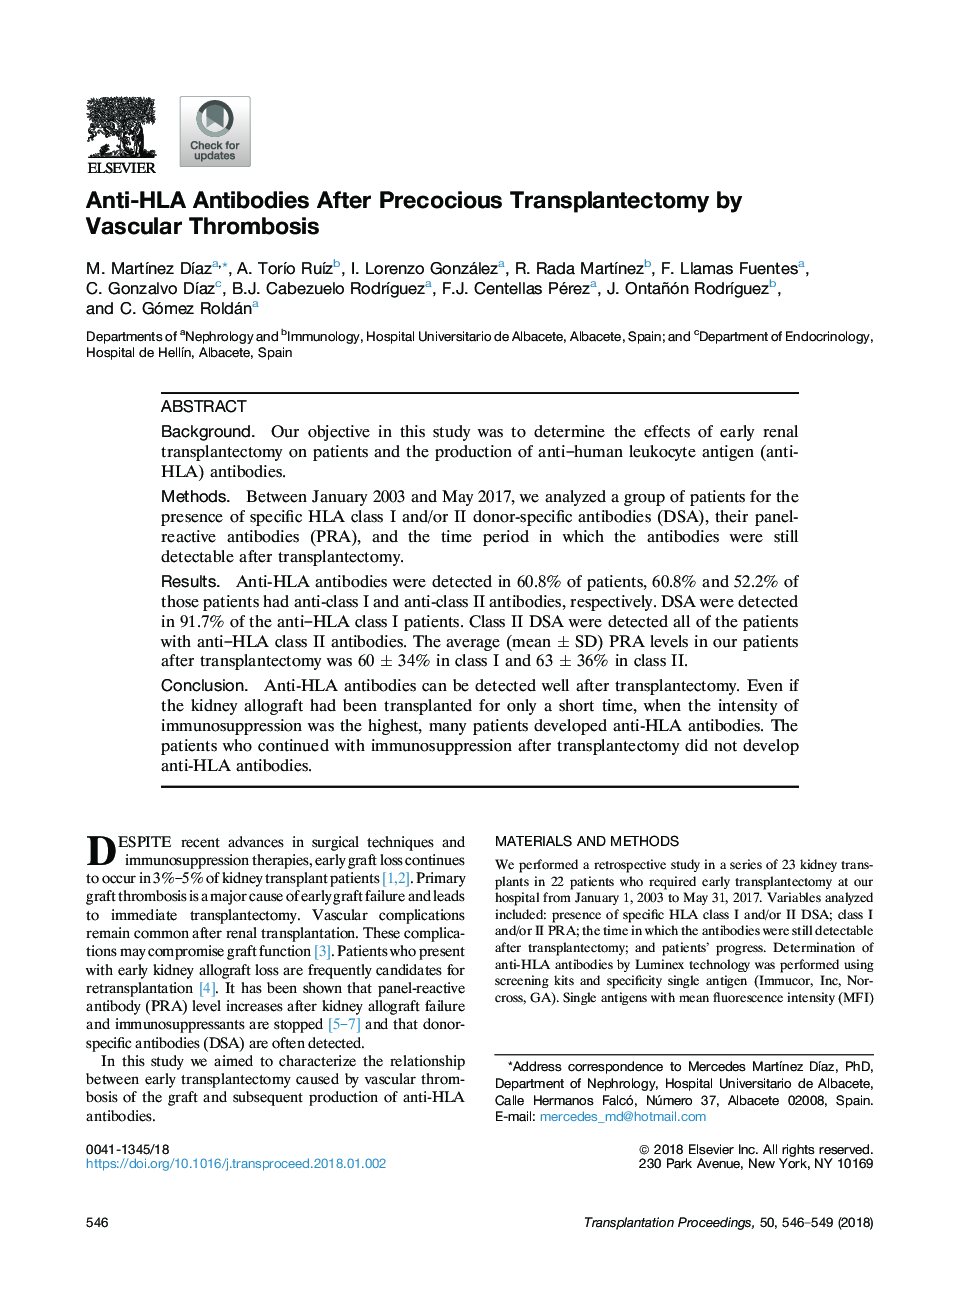 Anti-HLA Antibodies After Precocious Transplantectomy by Vascular Thrombosis